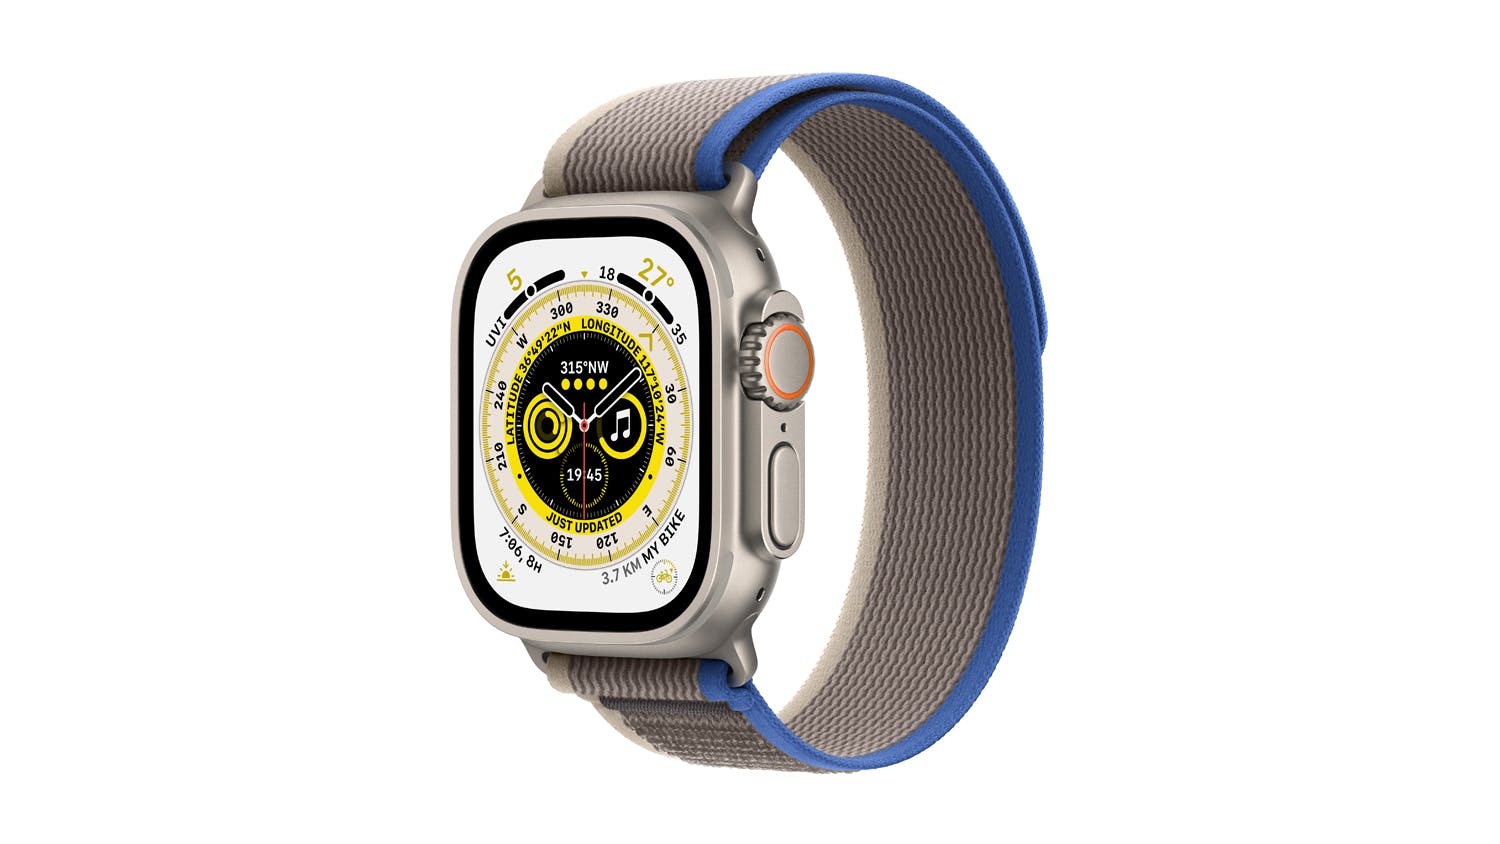 Apple Watch Ultra GPS & Cellular 49mm Titanium Case with M-L Blue Gray Trail Loop